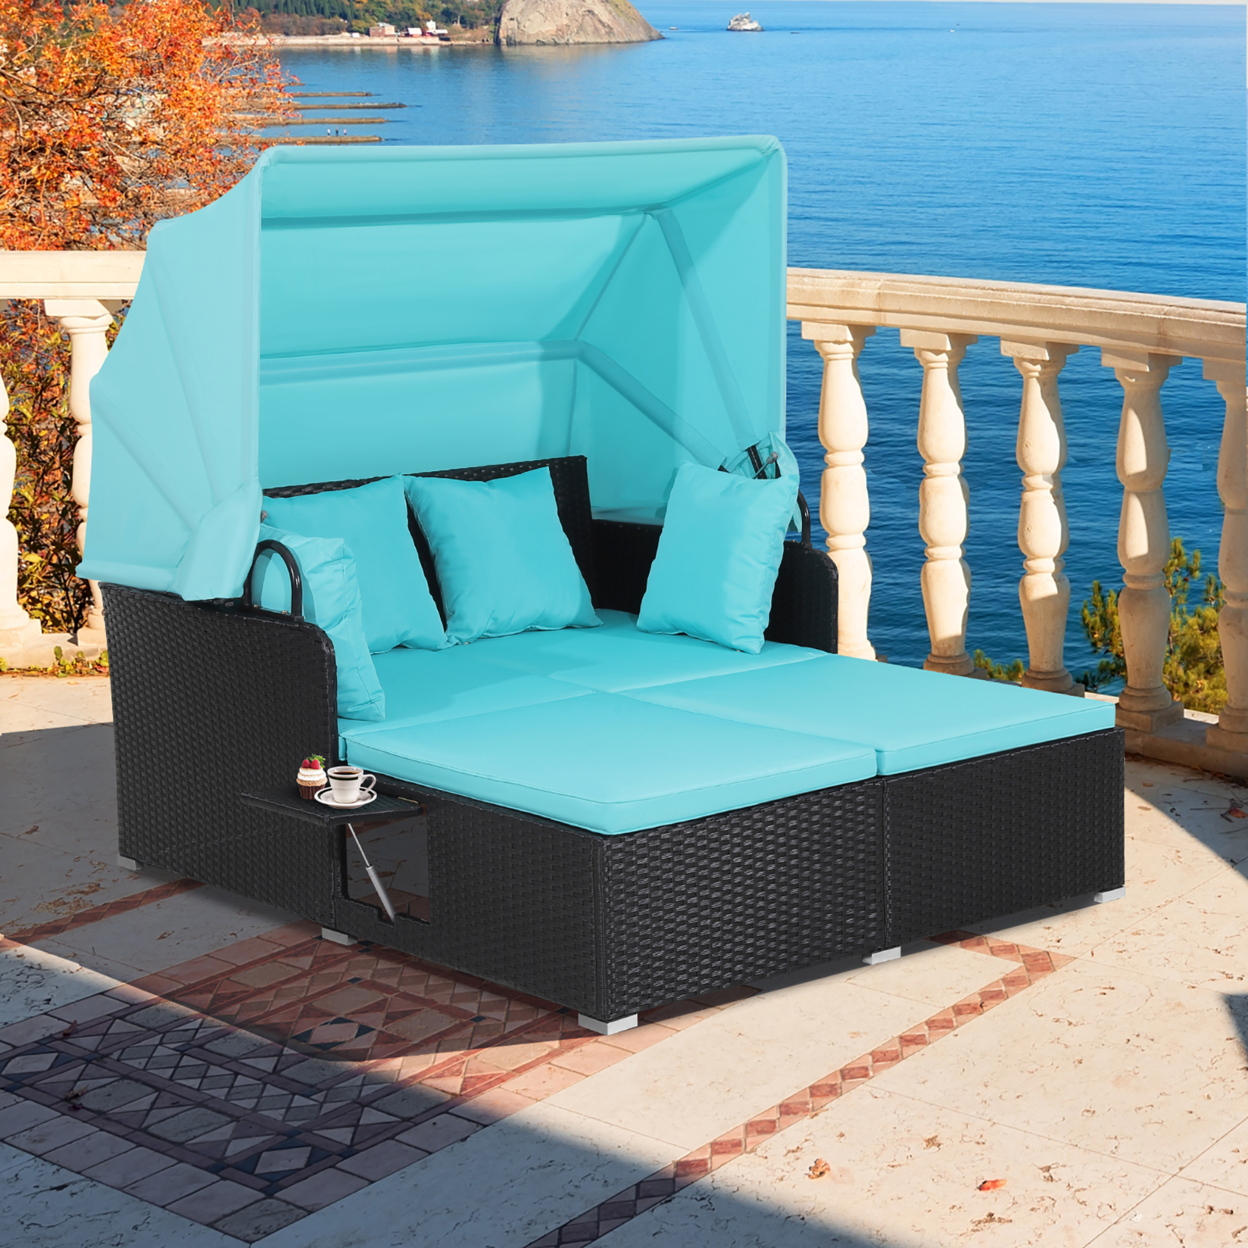 Patio Hand-Woven PE Wicker Daybed Outdoor Loveseat Sofa Set W/ Turquoise Cushions